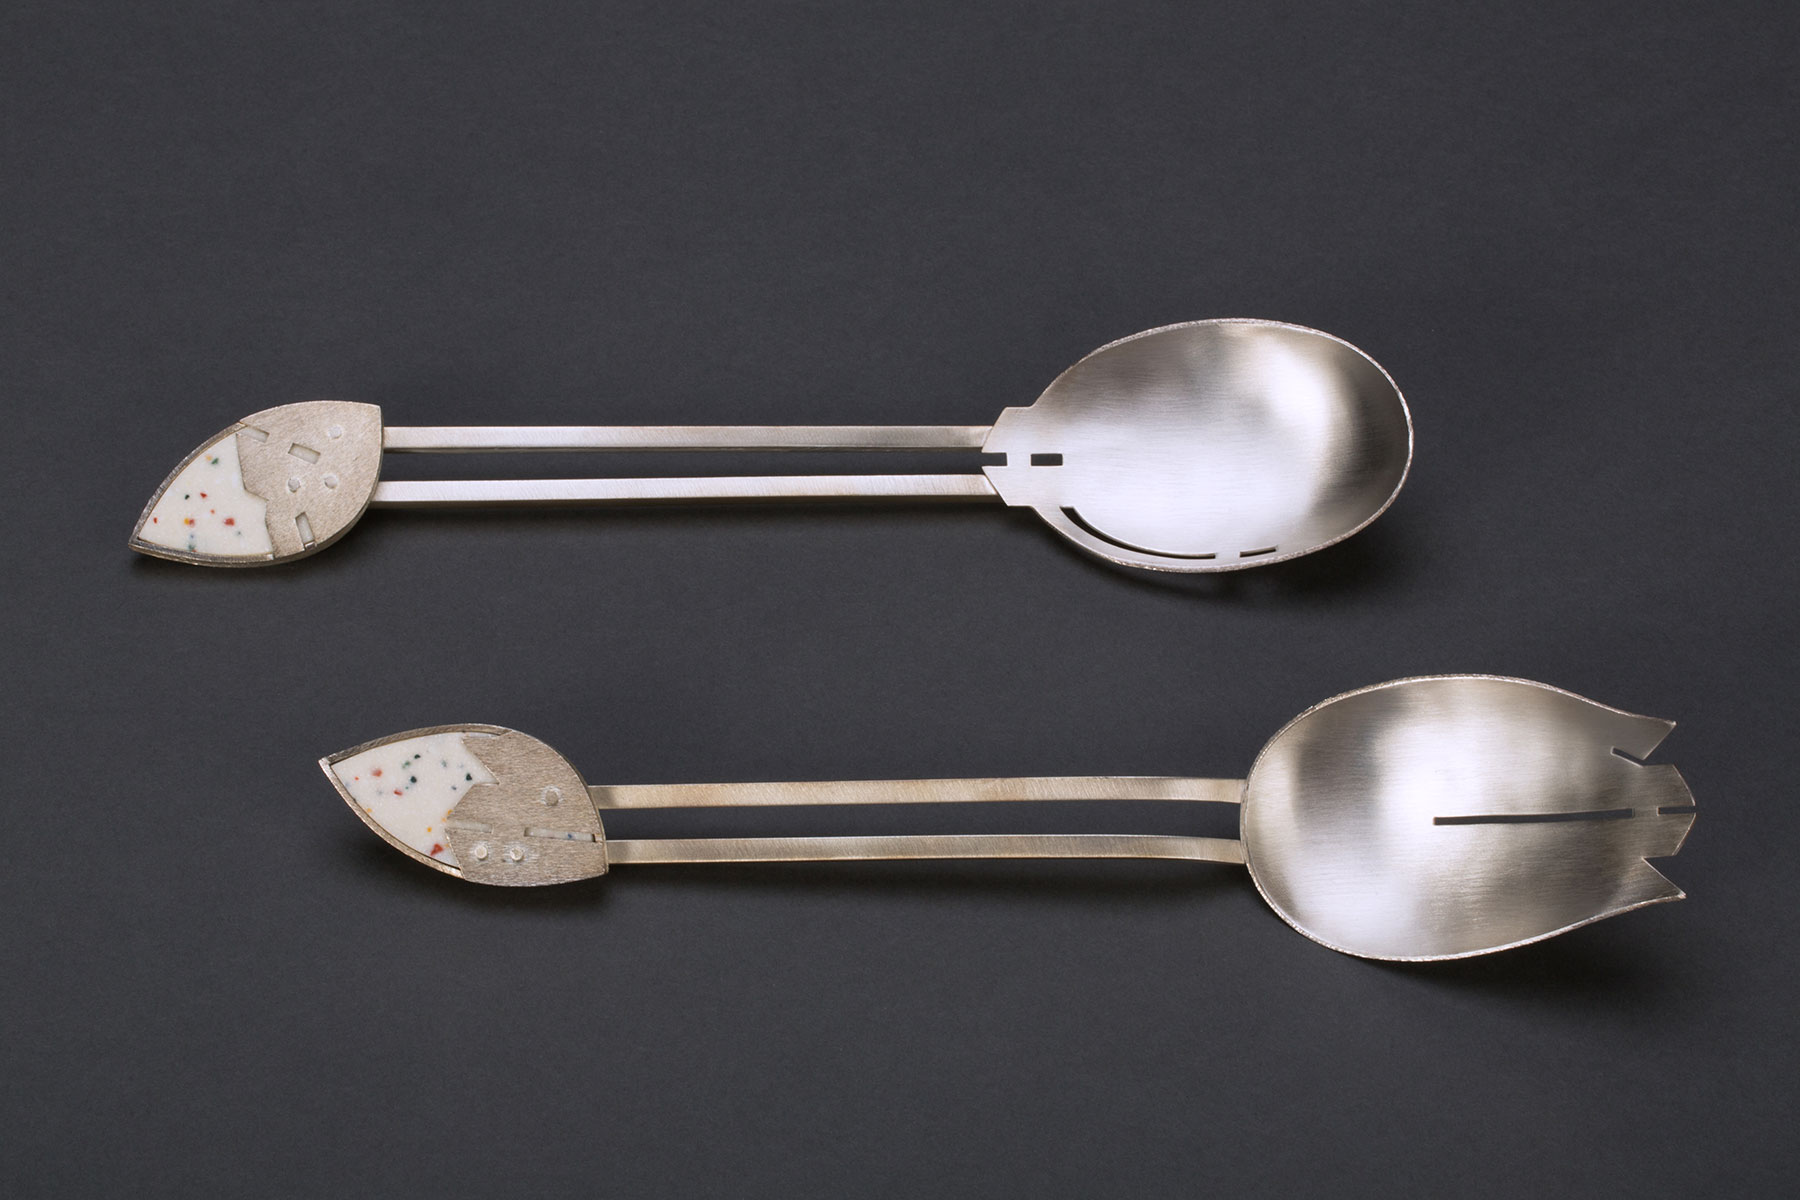 Two silver salad servers—one rounded and one jagged—with an eyeball-shaped adornment at the end